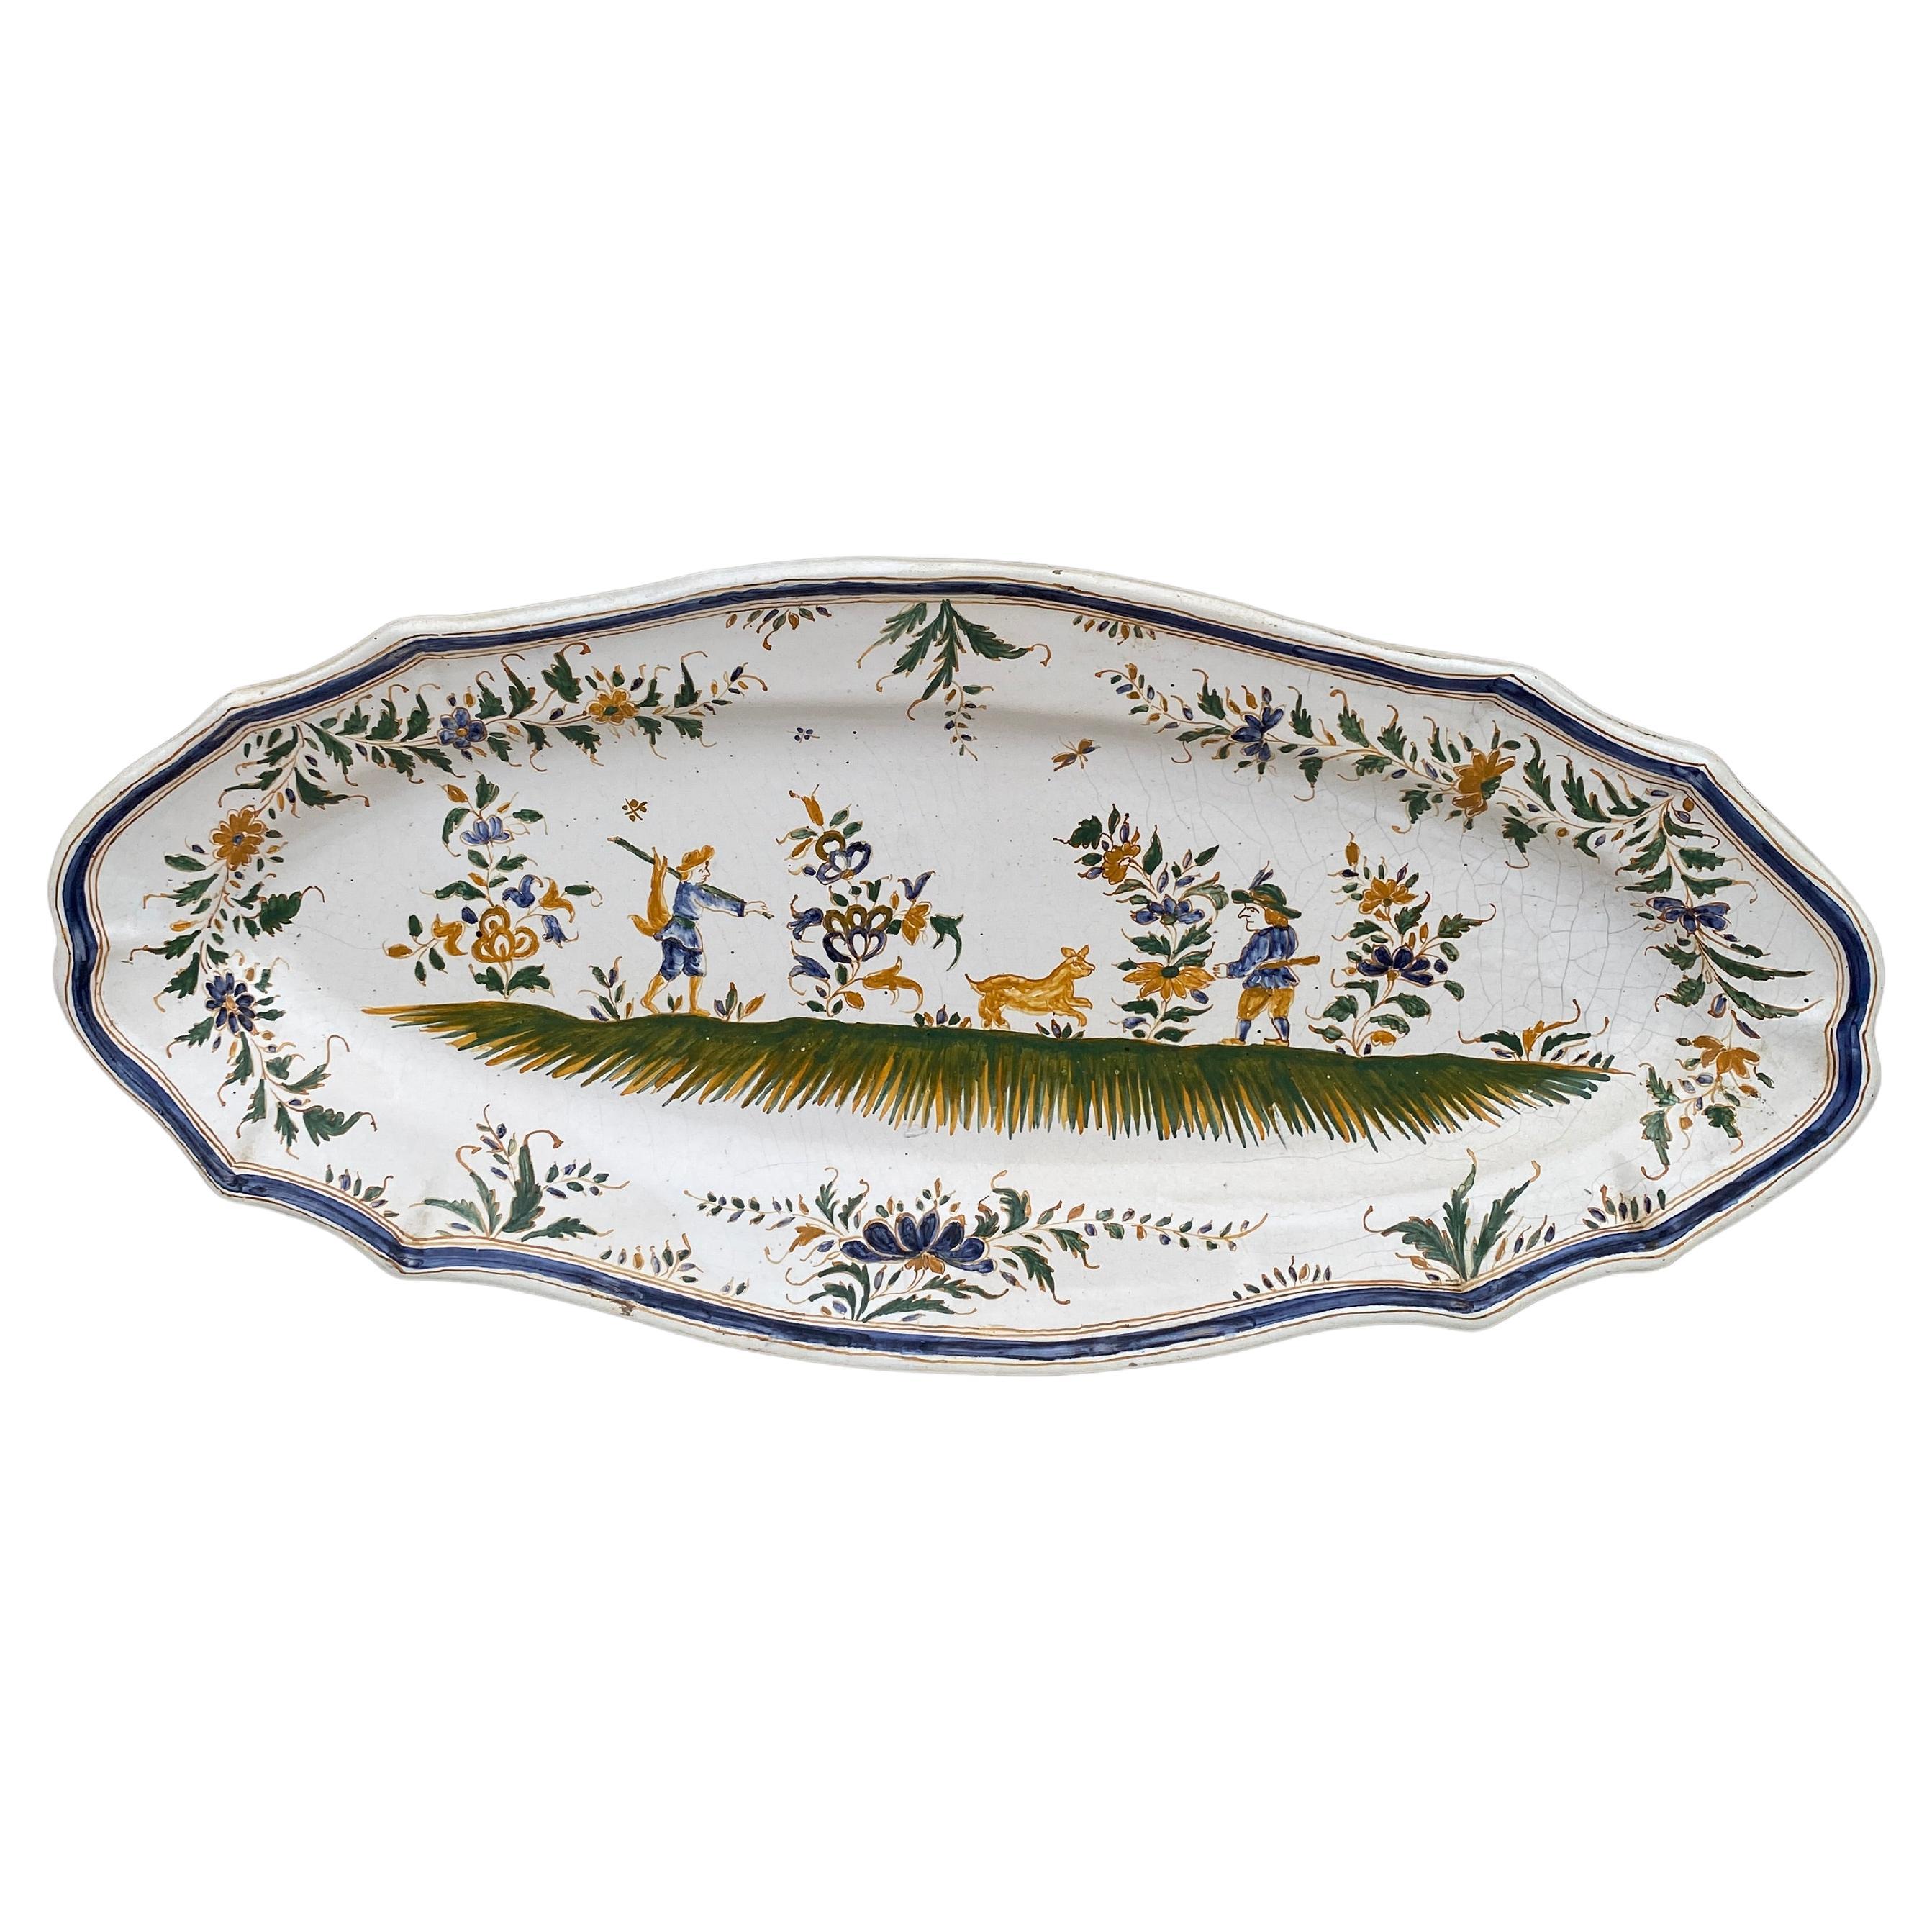 French Faience Fish Platter Moustiers Style Circa 1950.
Manufacture of Martres Tolosane.
Hunting scene.